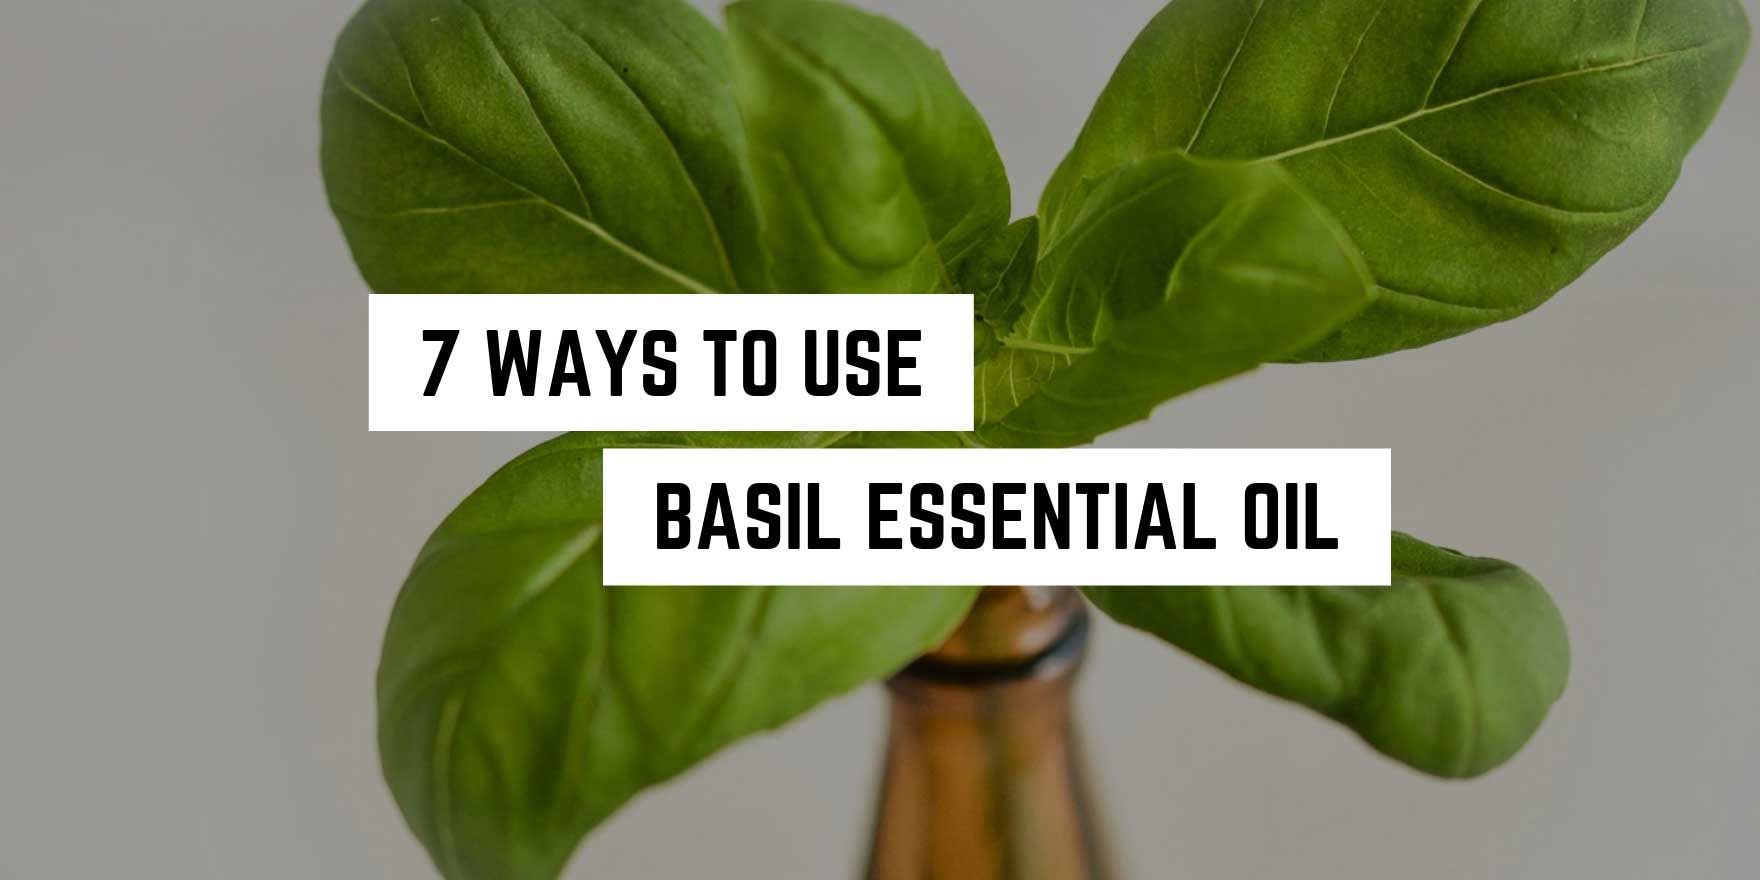 A sprouting basil plant emerging from a bottle with a caption "7 ways to use basil essential oil in metaphysical practices" against a neutral background.